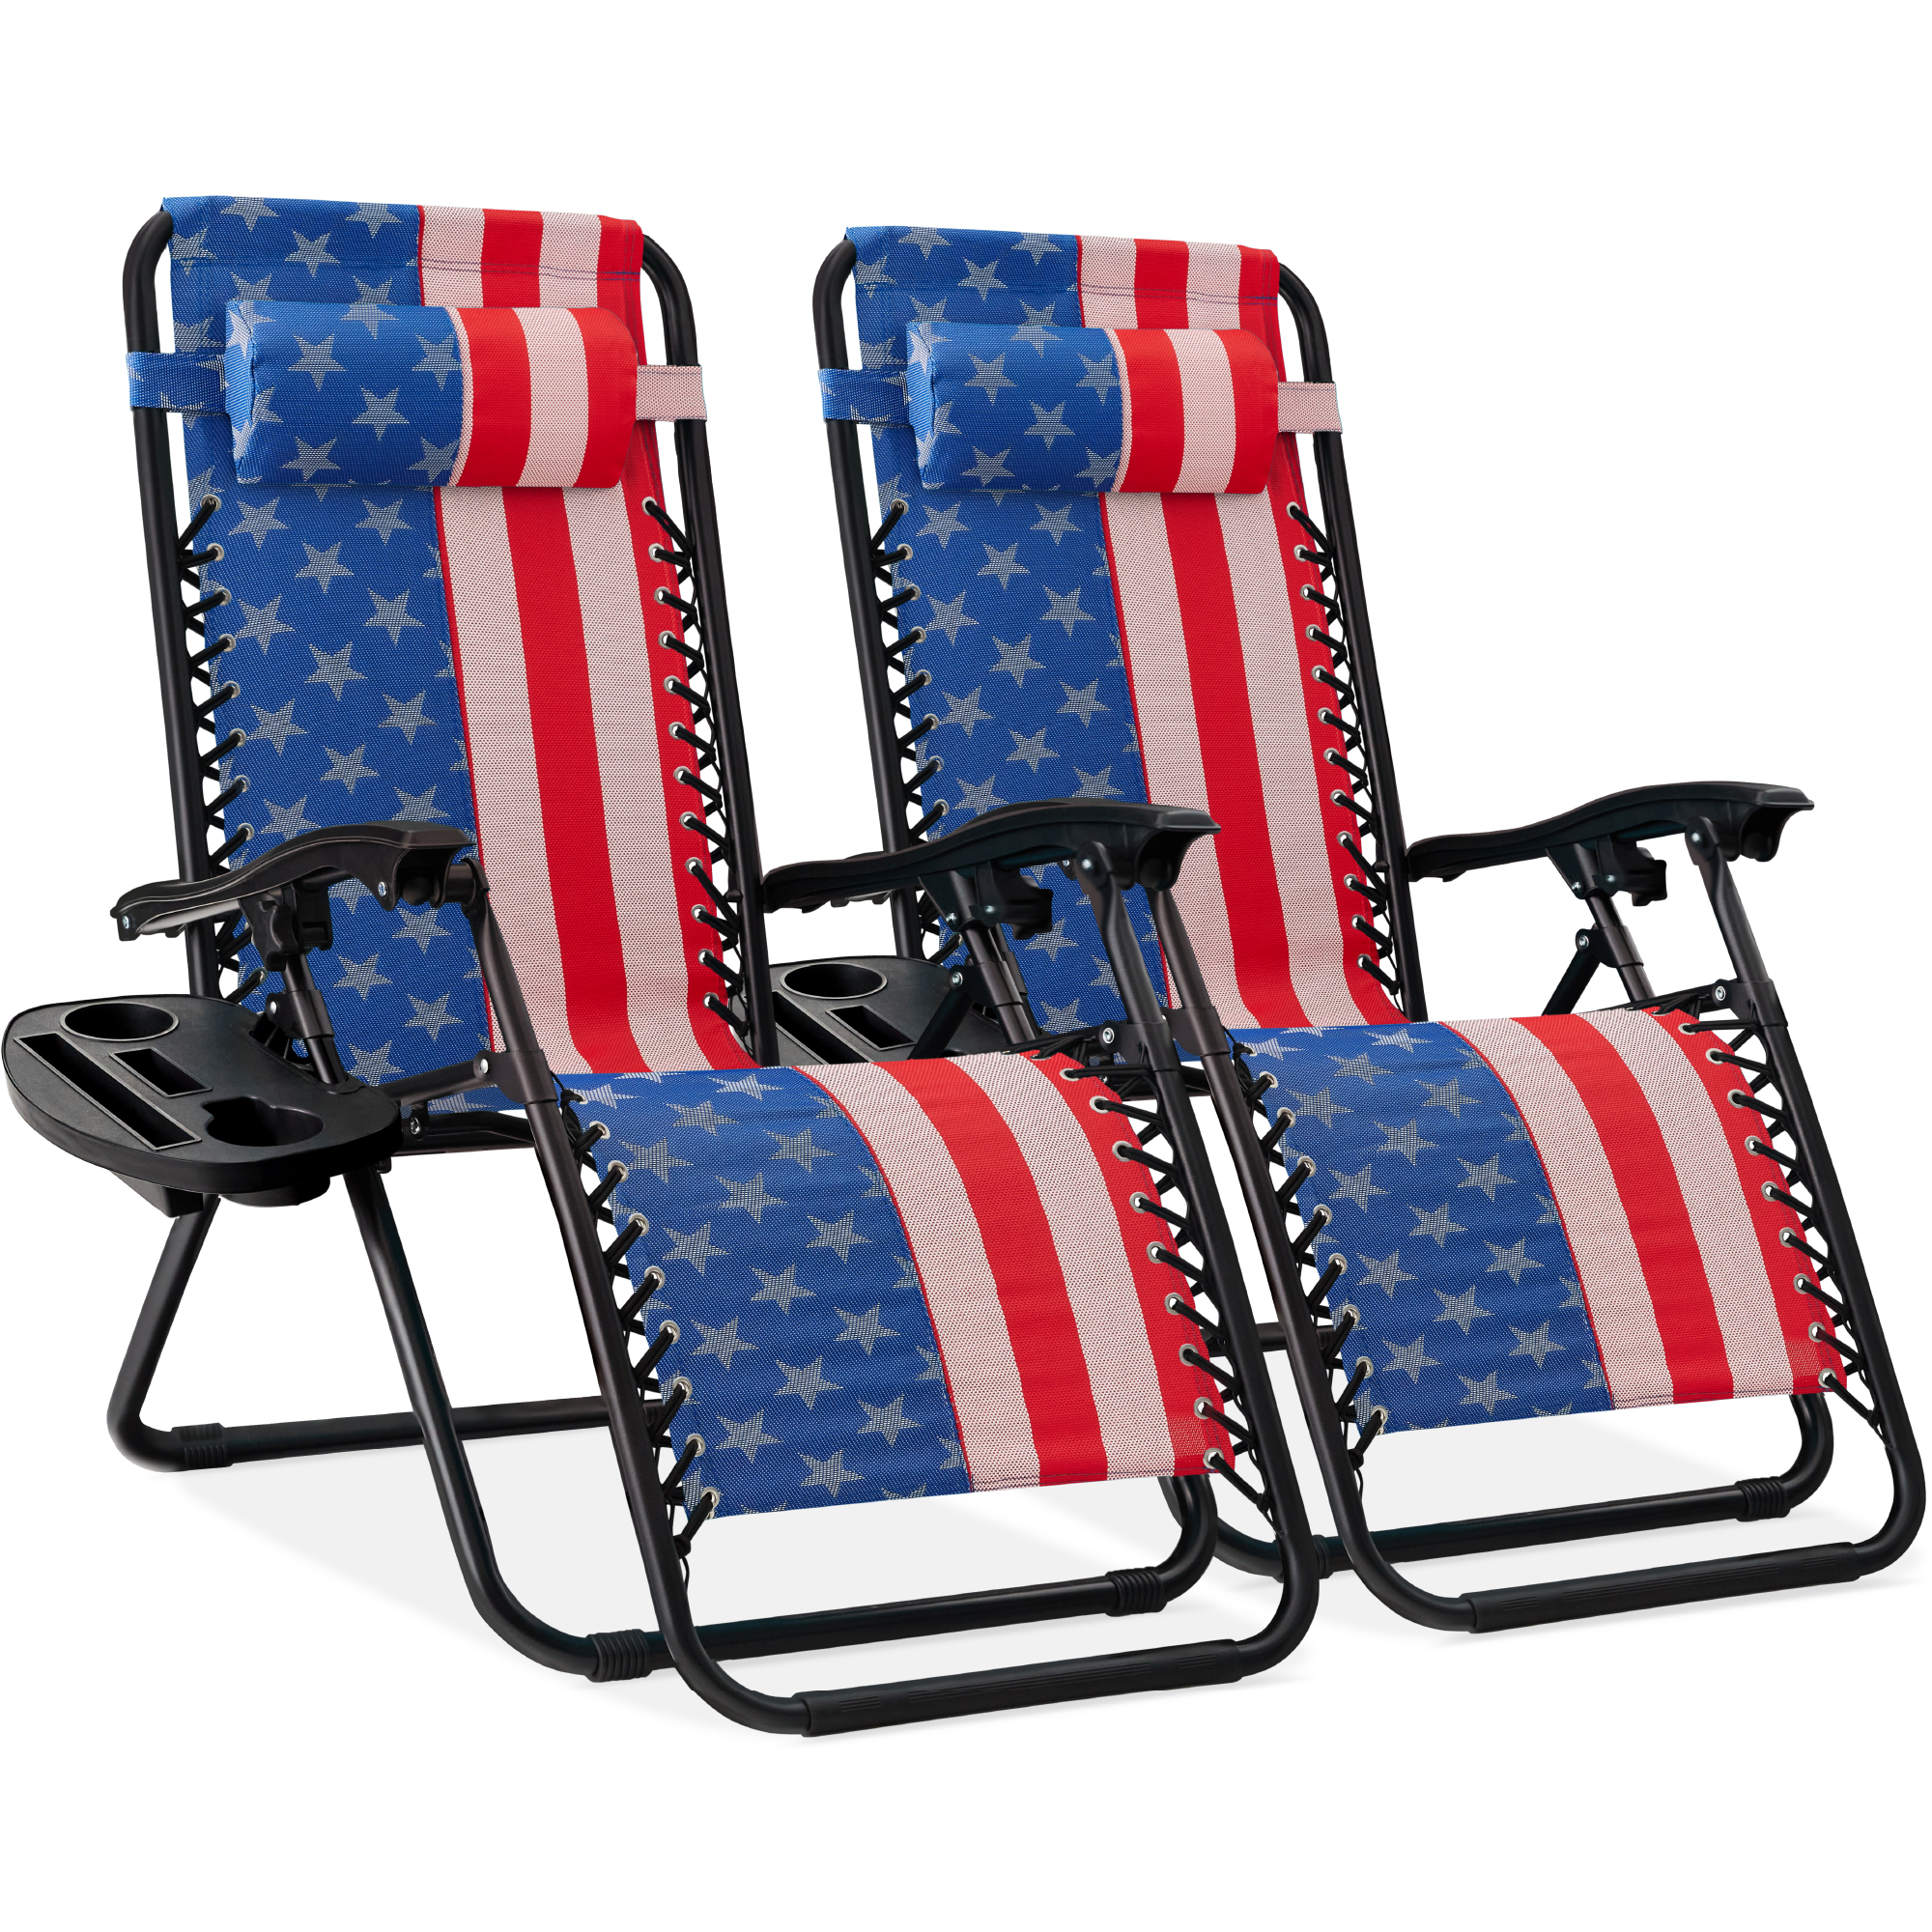 Best Choice Products Set of 2 Zero Gravity Lounge Chair Recliners for Patio, Pool w/ Cup Holder Tray - American Flag - image 1 of 8